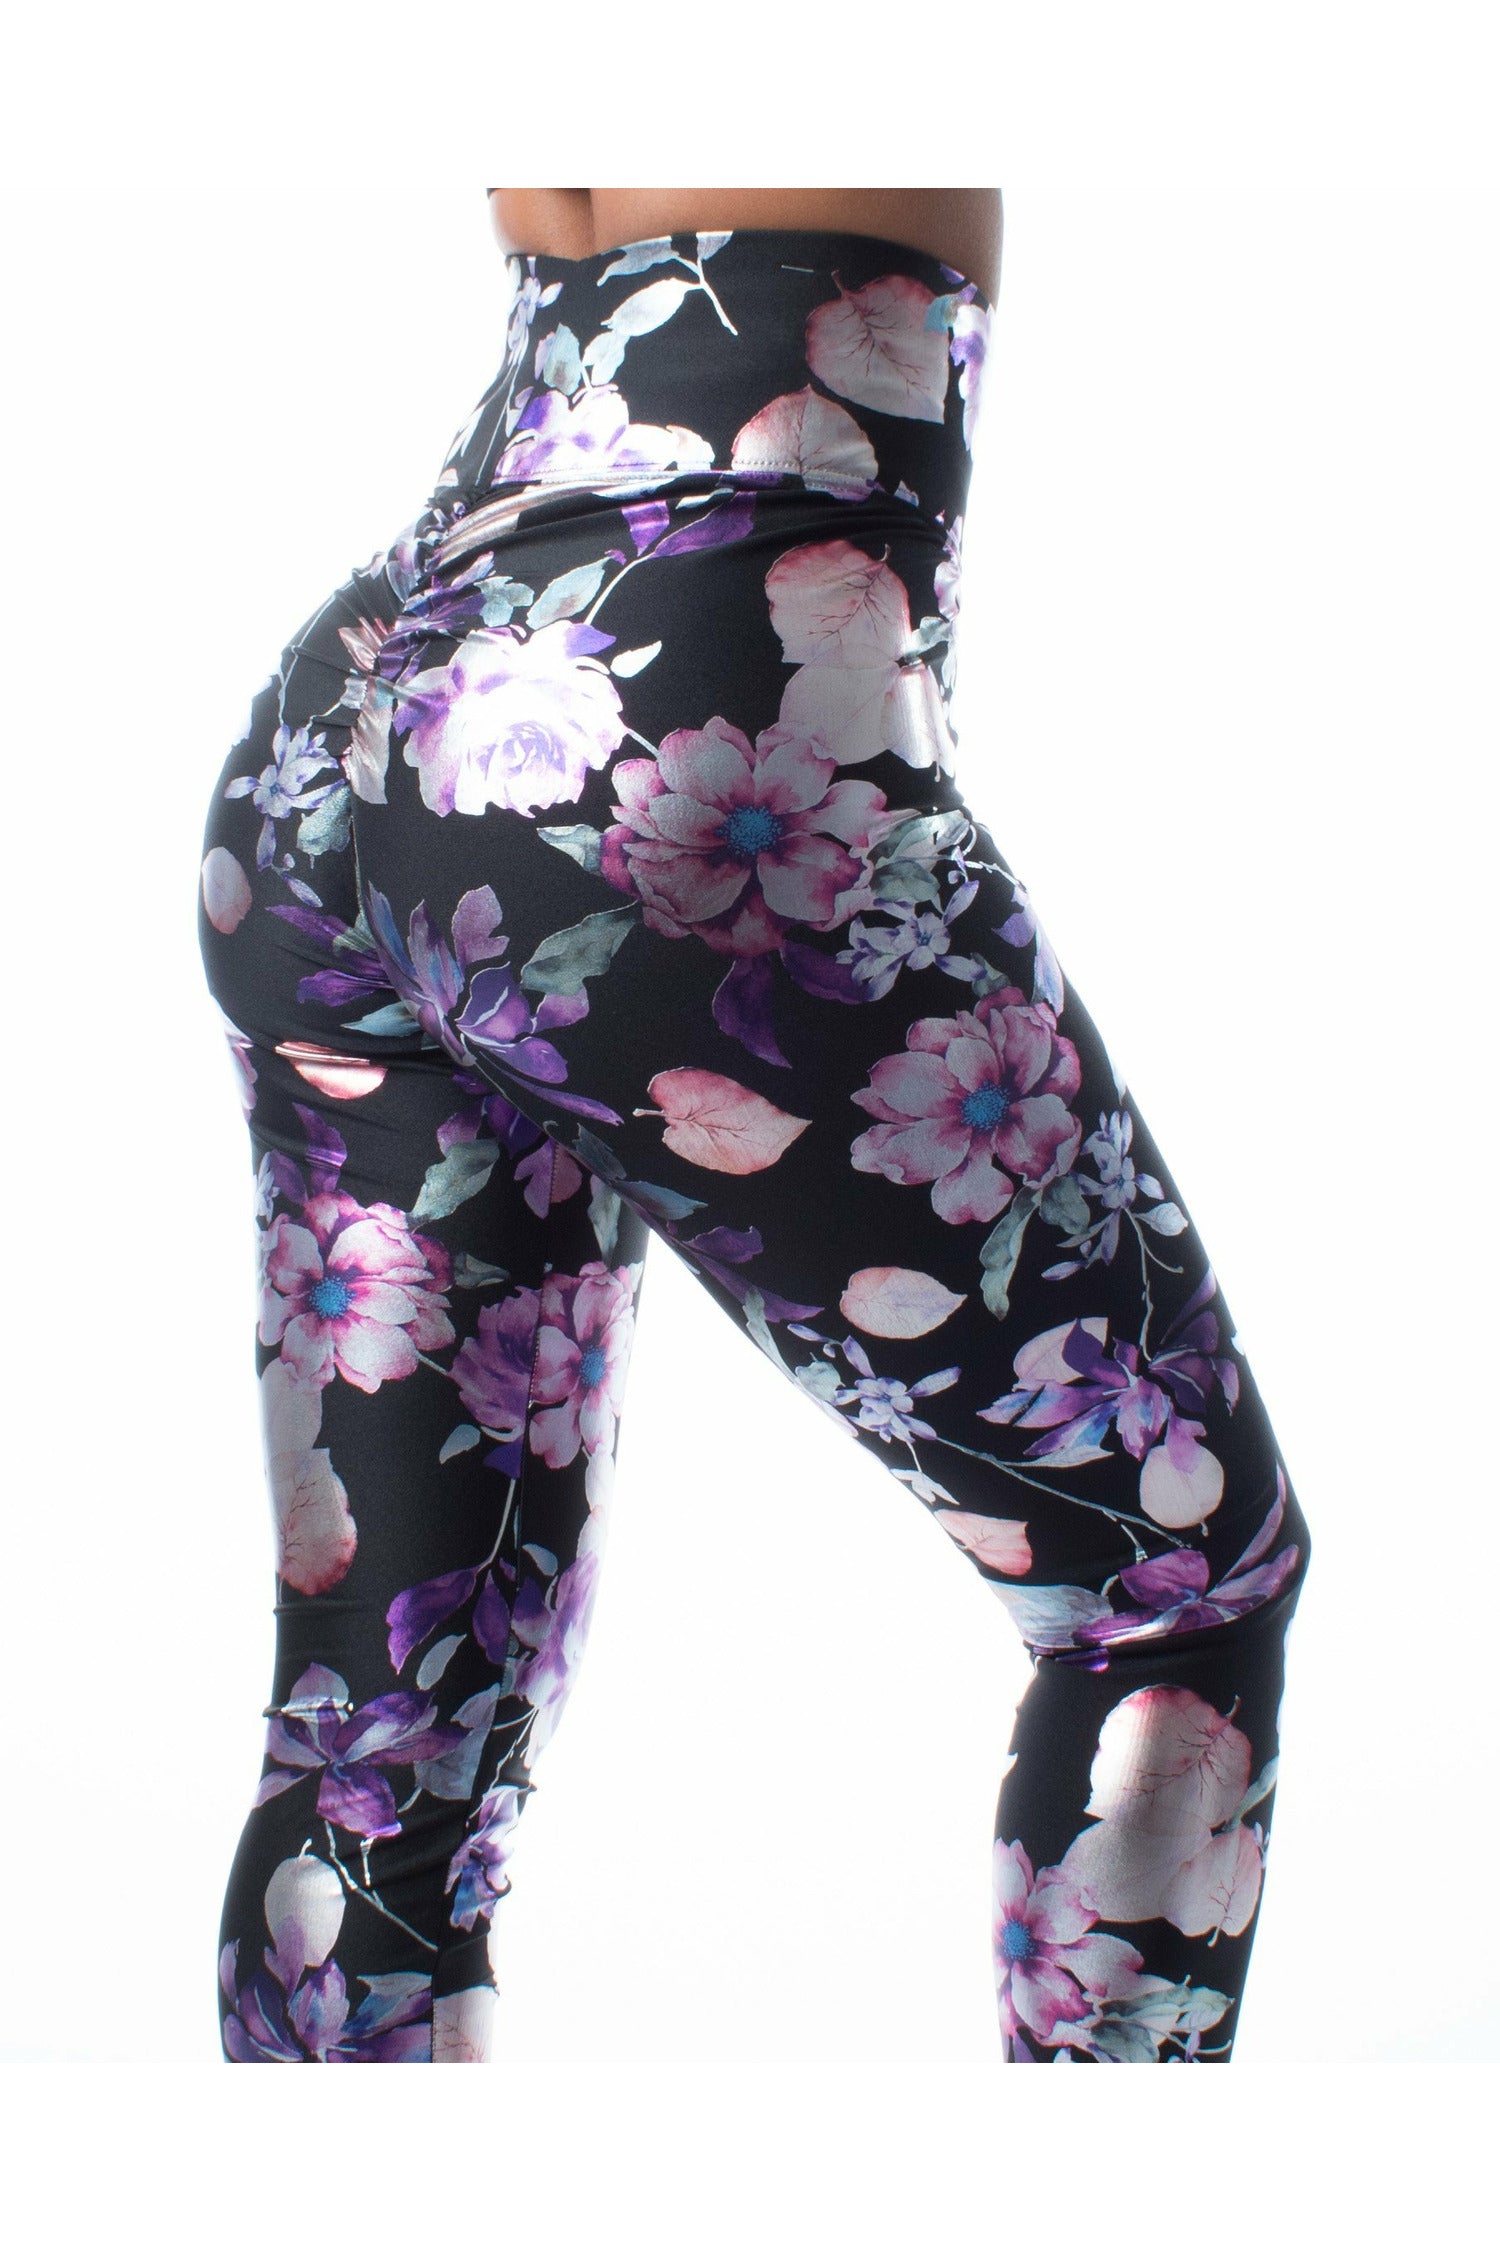 Petal to the Metal* (Elevated Basic Booty) by Cute Booty Lounge